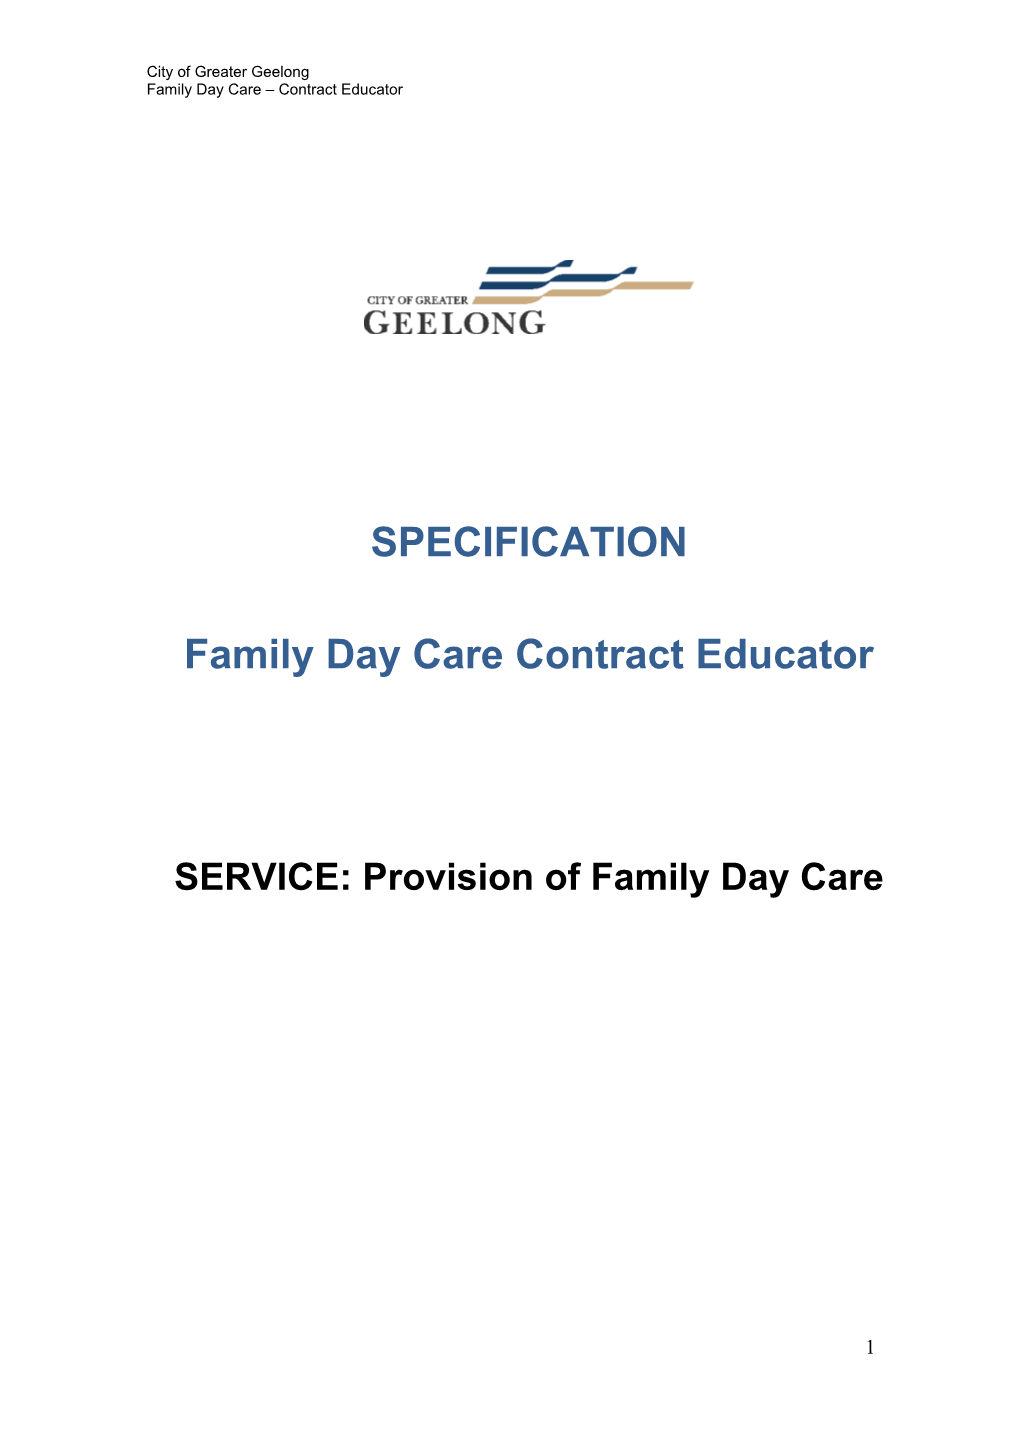 Family Day Care Contract Educator